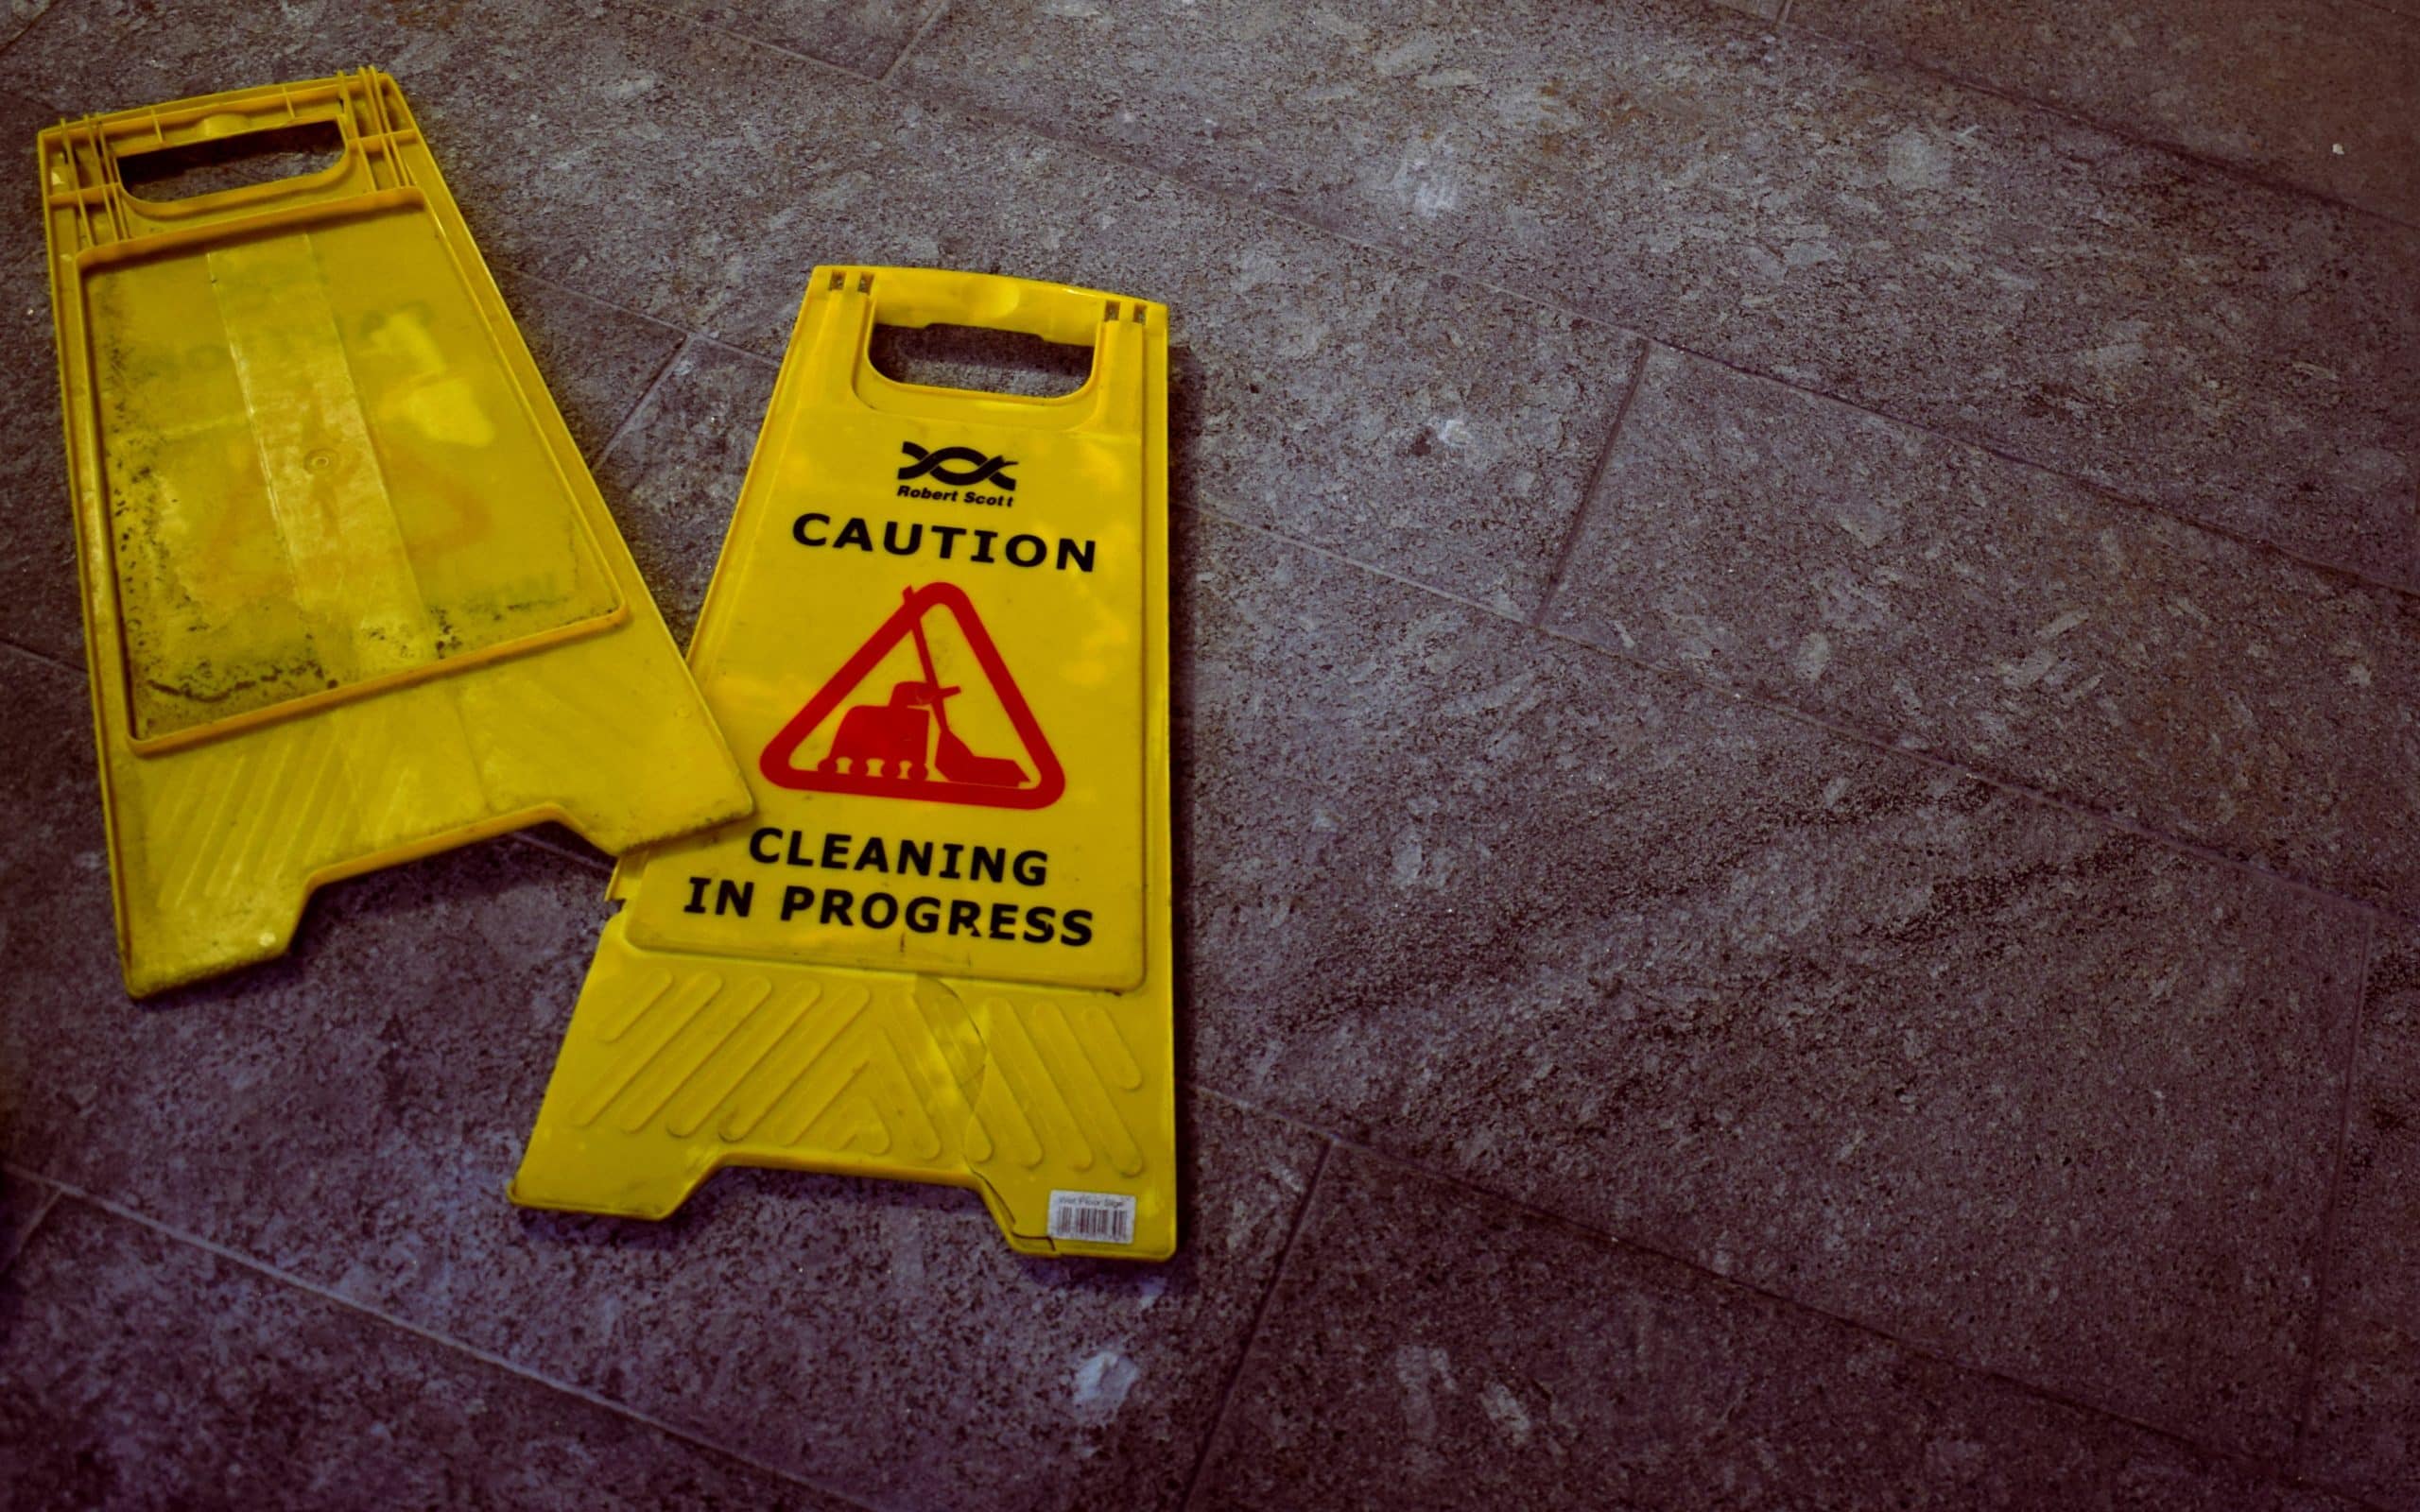 Slip and Fall Lawyer Spaulding Injury Law scaled 1